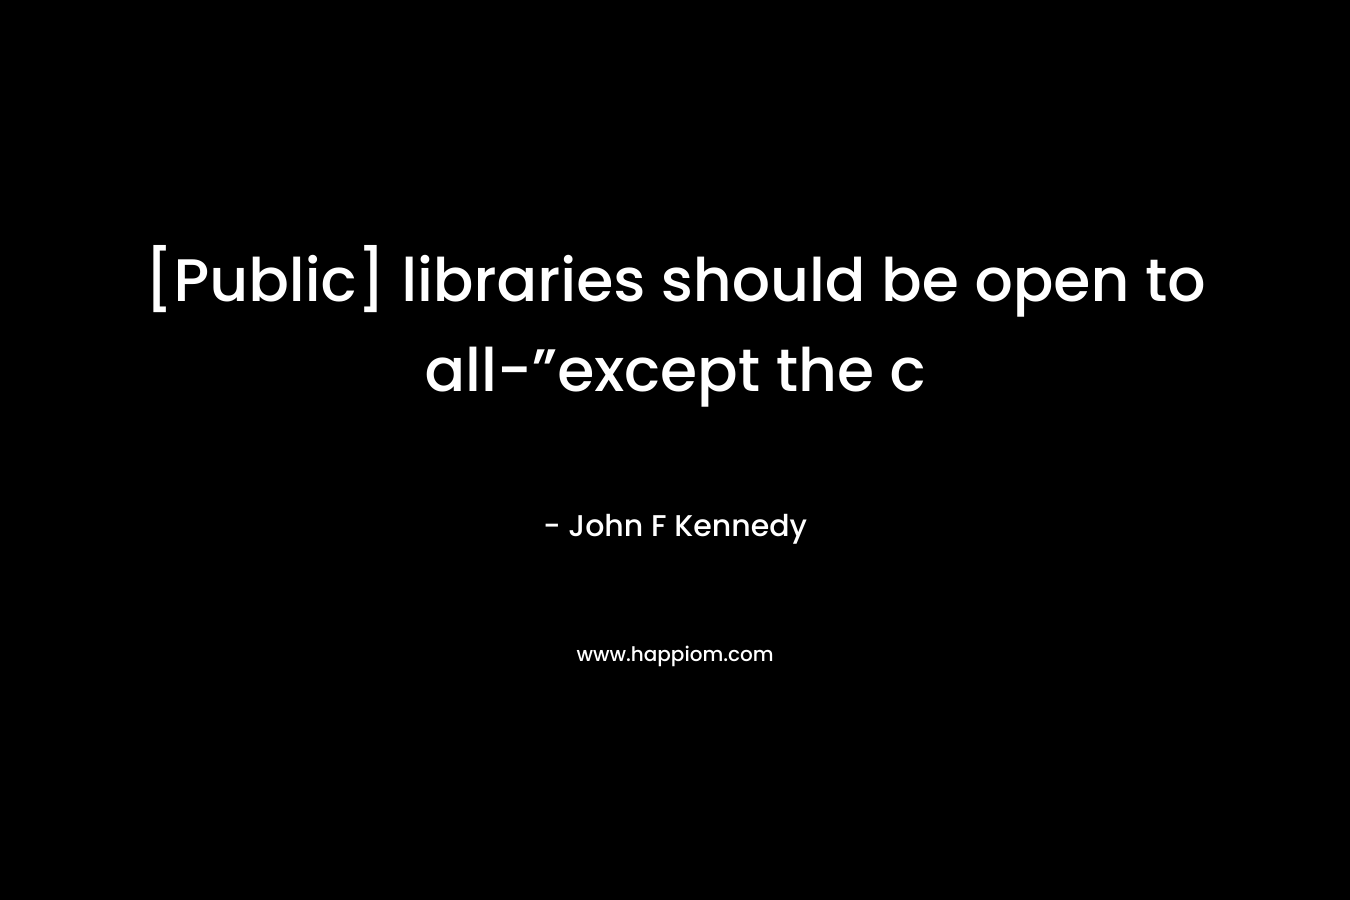 [Public] libraries should be open to all-”except the c